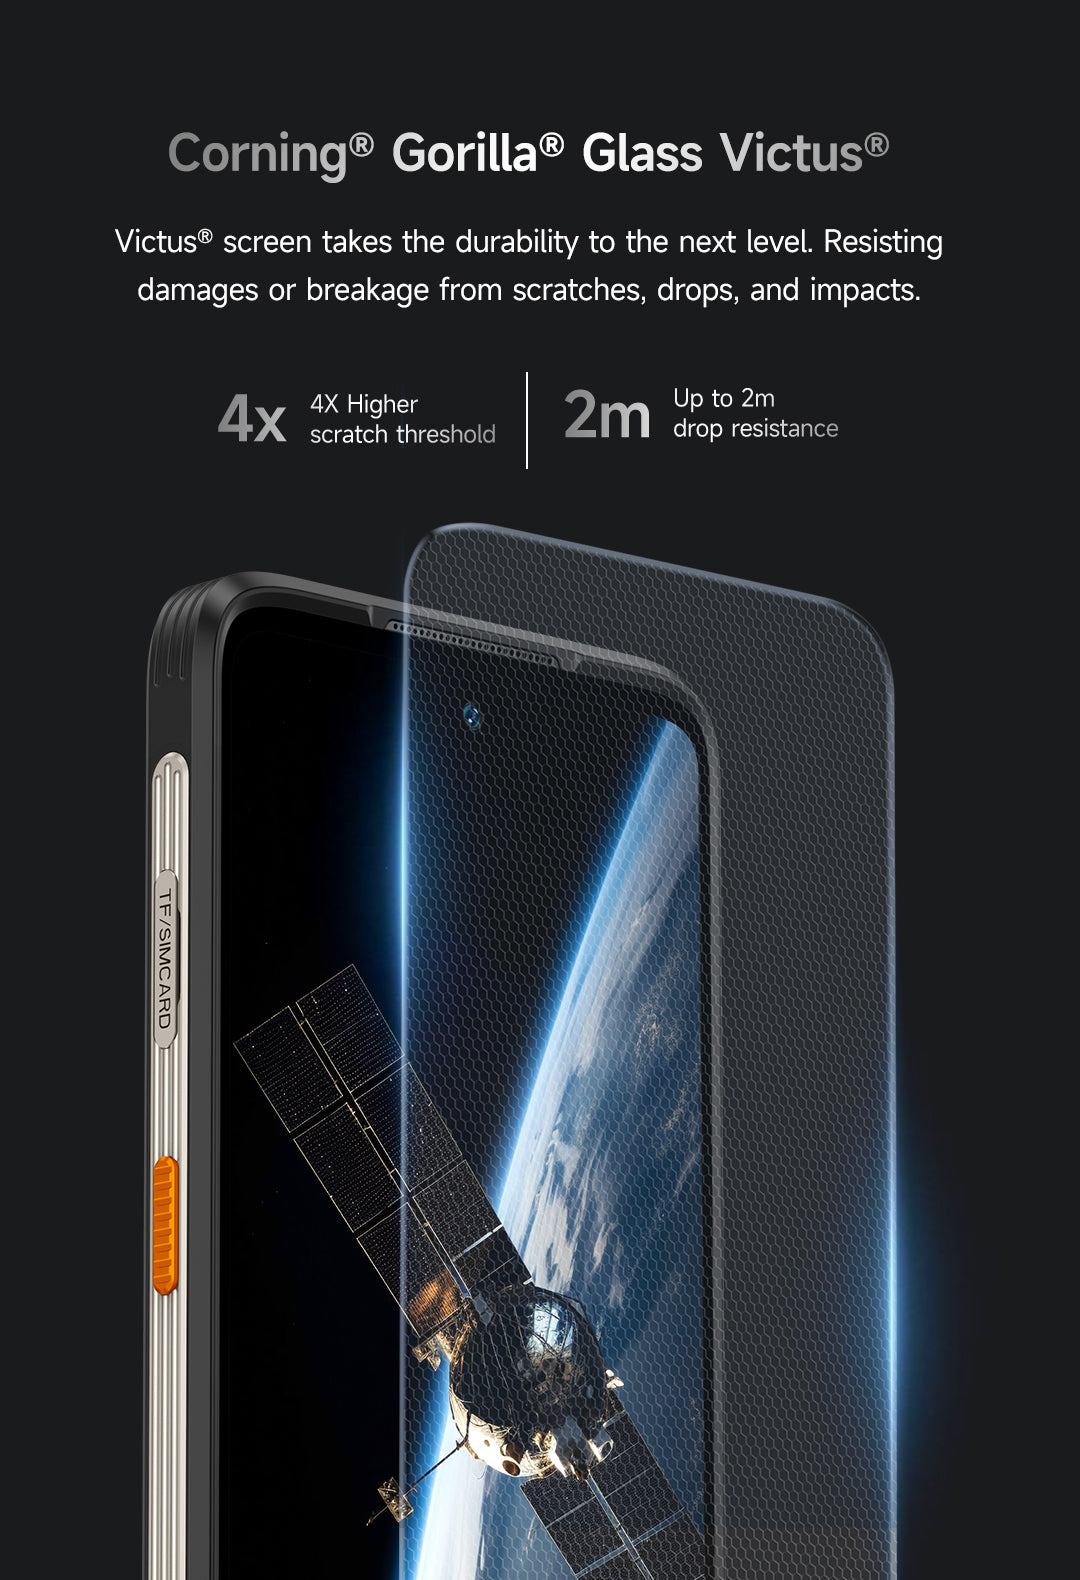 Ulefone Armor 23 Ultra launched with titanium frame, satellite